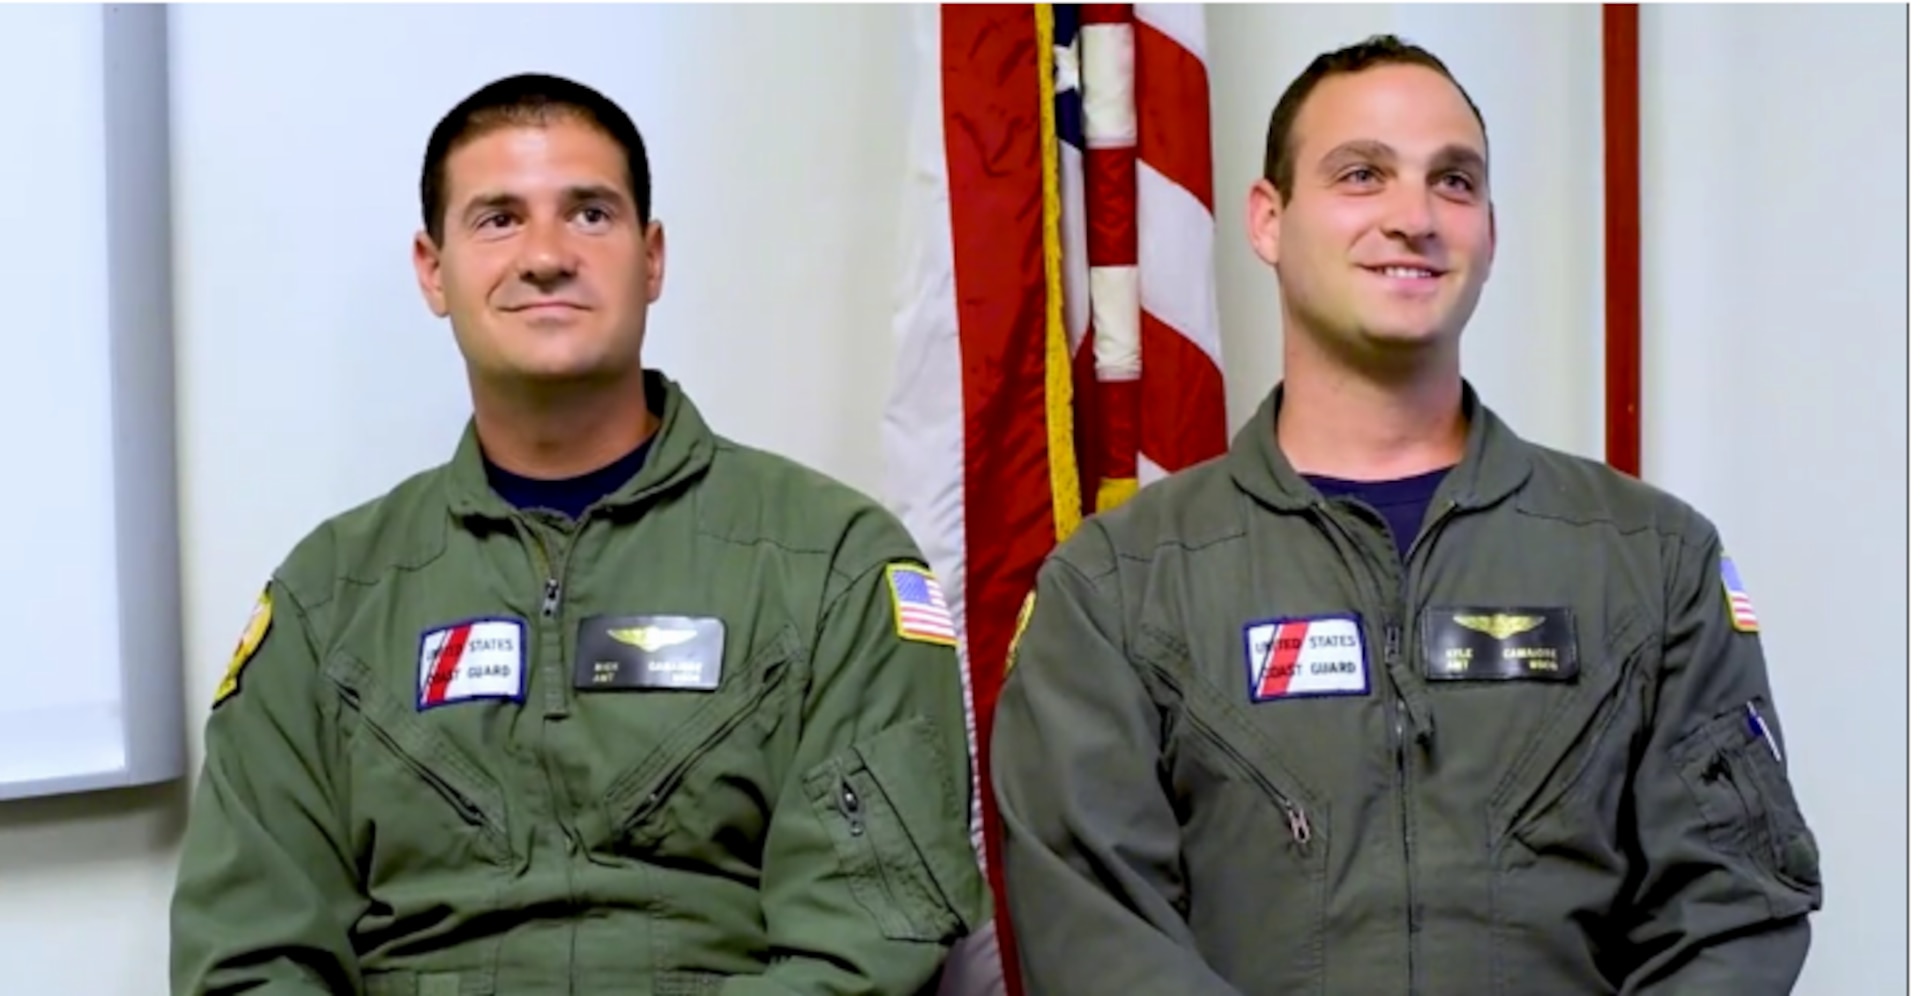 Kyle and Nick Camaiore are first class petty officers, aviation maintenance technicians and brothers stationed at Coast Guard Air Station Elizabeth City, North Carolina. In this video, they discuss the pride and joy they have found in their 10-year career while serving in the Coast Guard. U.S. Coast Guard video by Petty Officer 1st Class Stephen Lehmann.